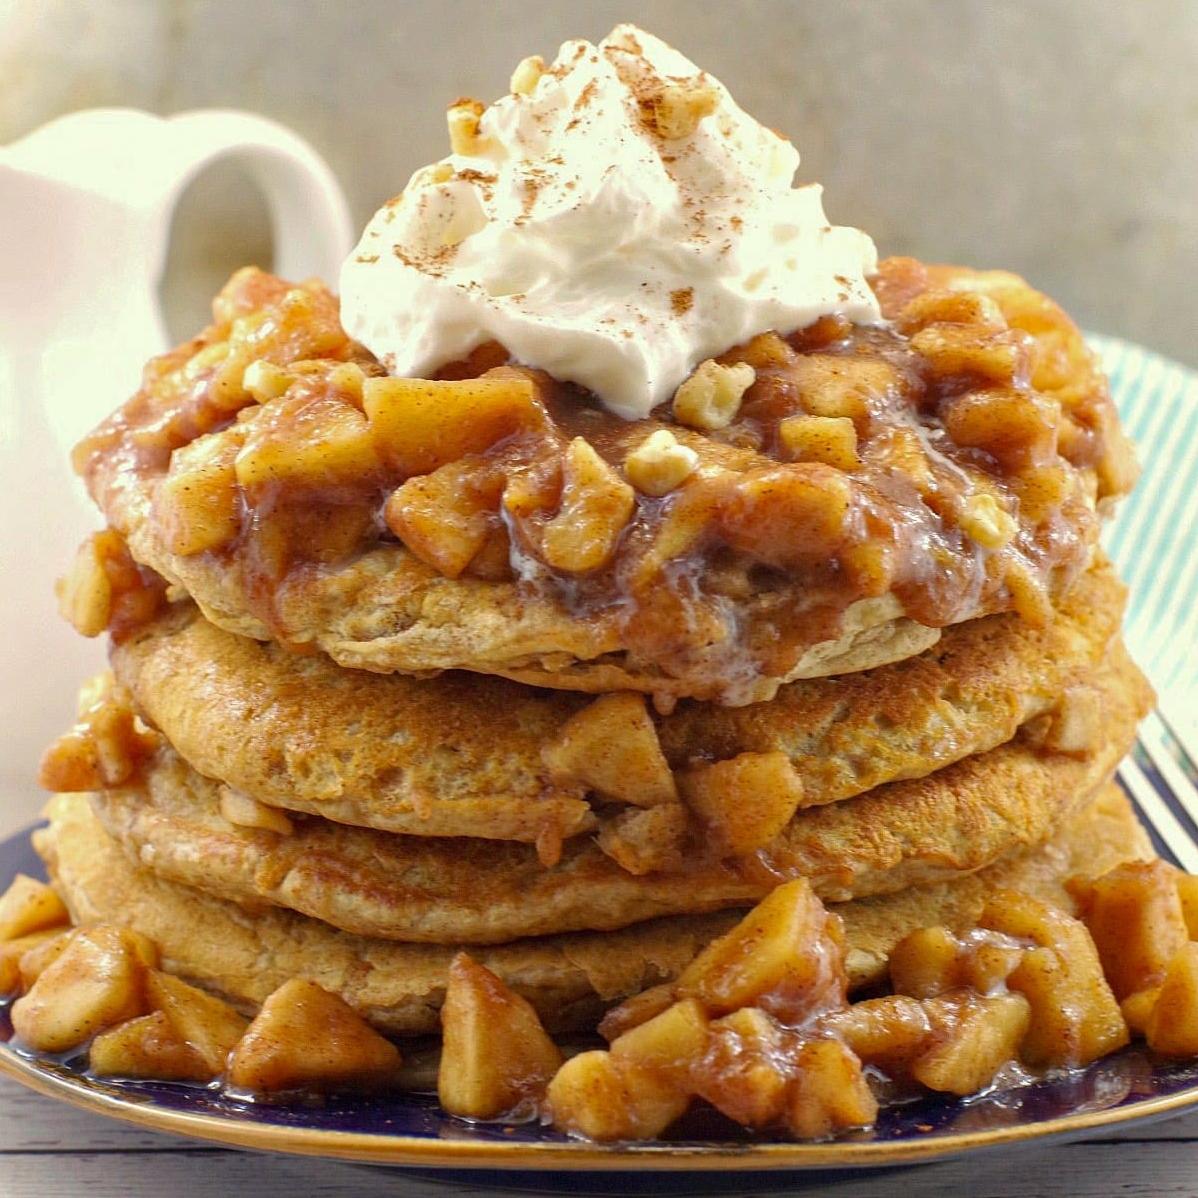  Pancakes so good, you'll forget they're allergy-friendly.